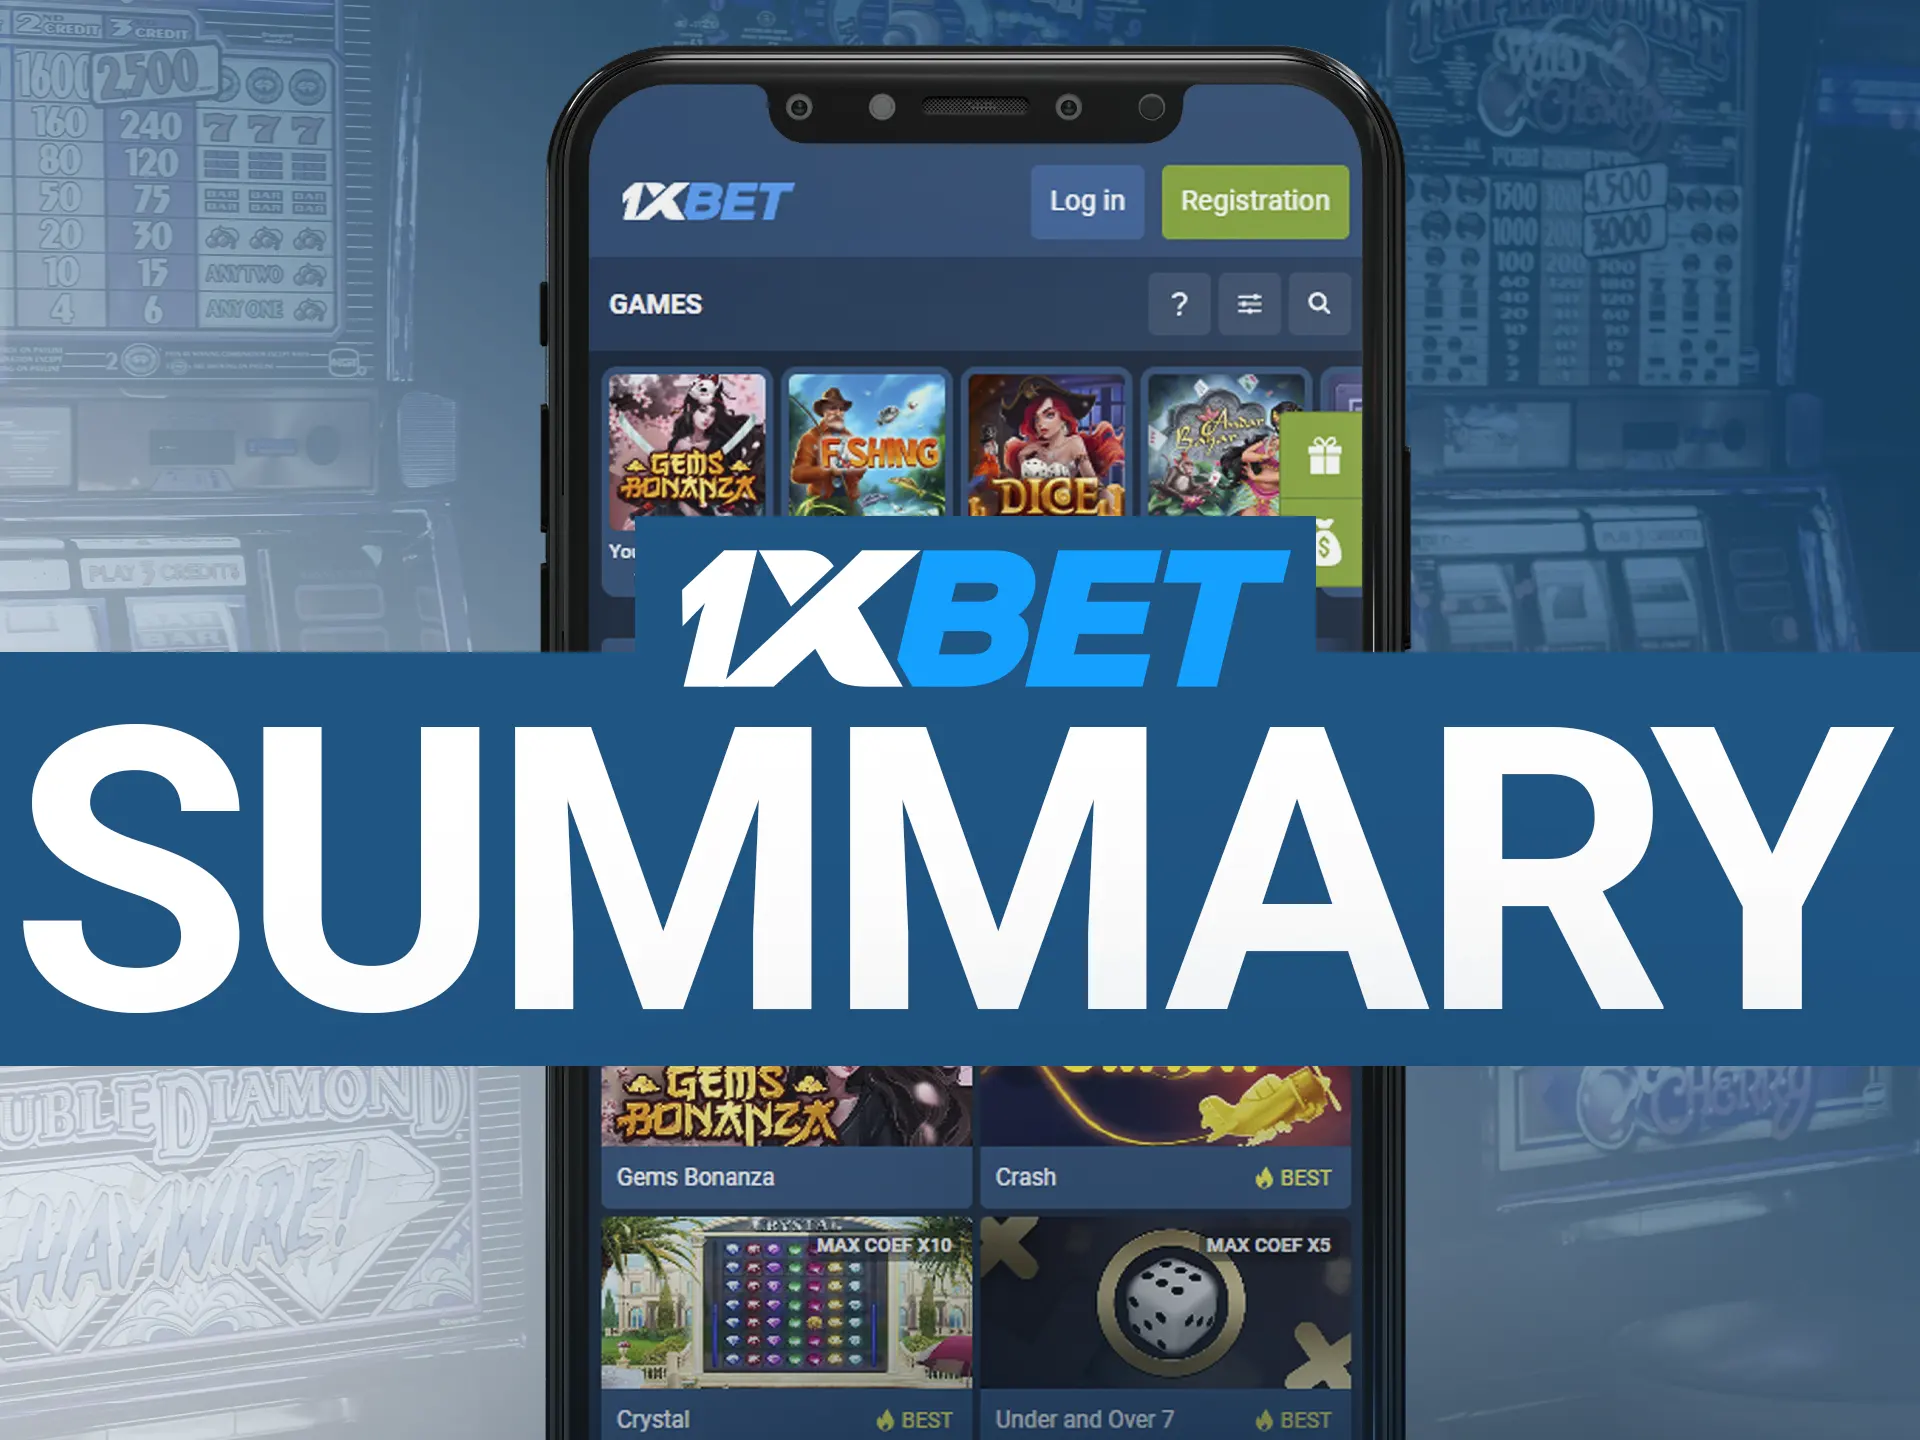 1xbet is one of the best casino apps in the world.